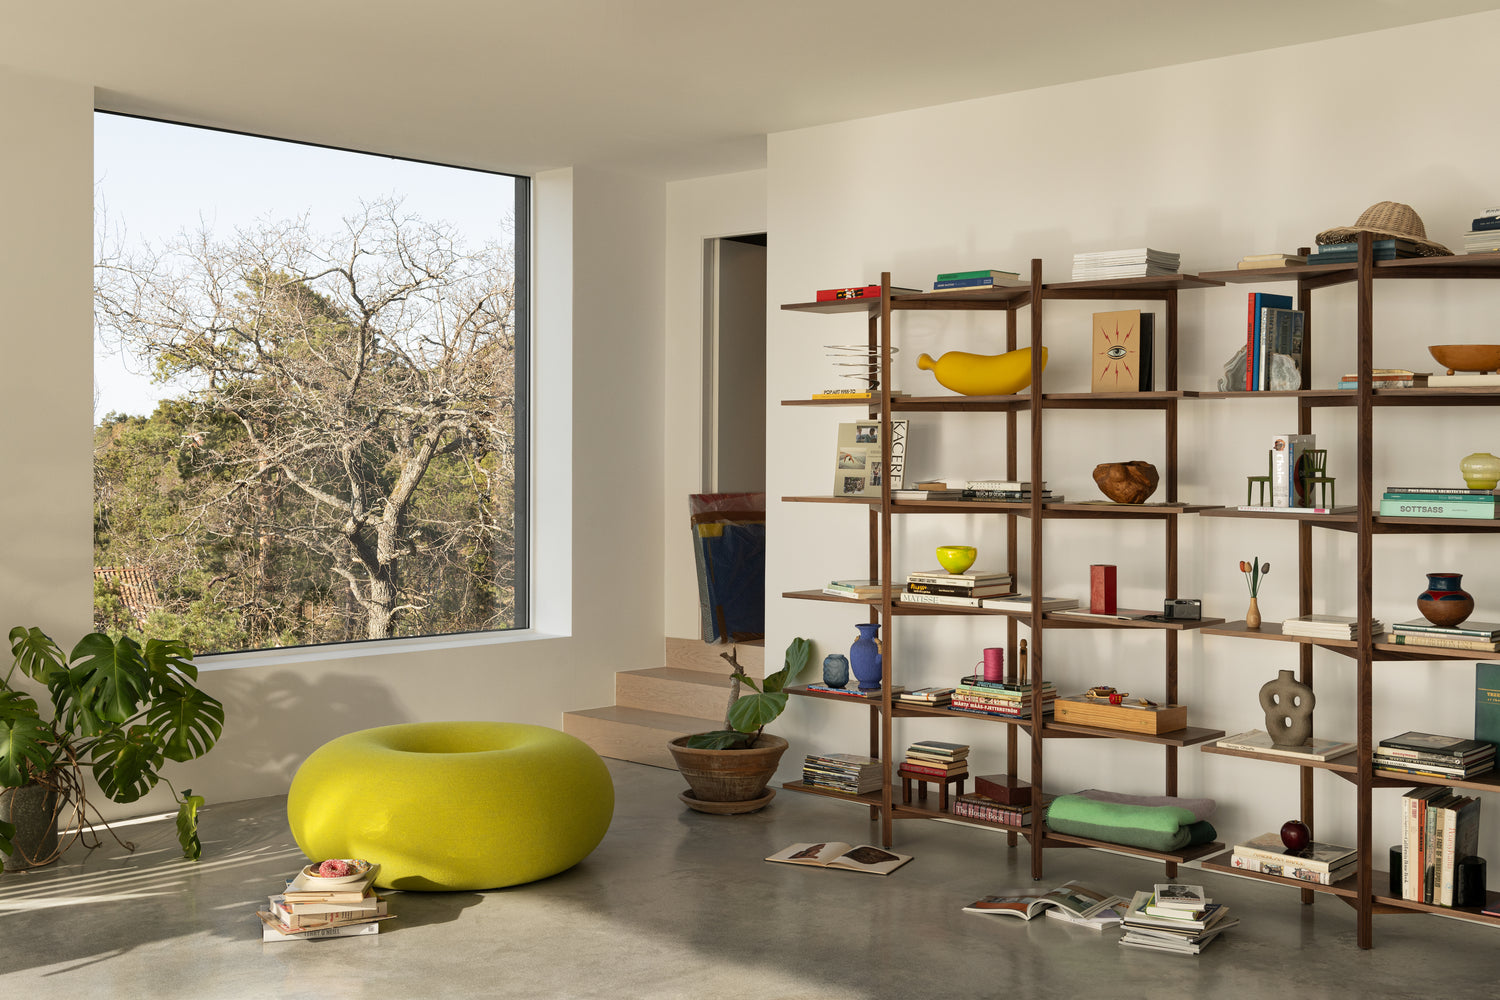 A living room / lounge scene featuring 2 Zig Zag High Shelves in the shade Walnut filled with books and other decorative objects. On the floor beside them is Boa Pouf in Sulfur Yellow.